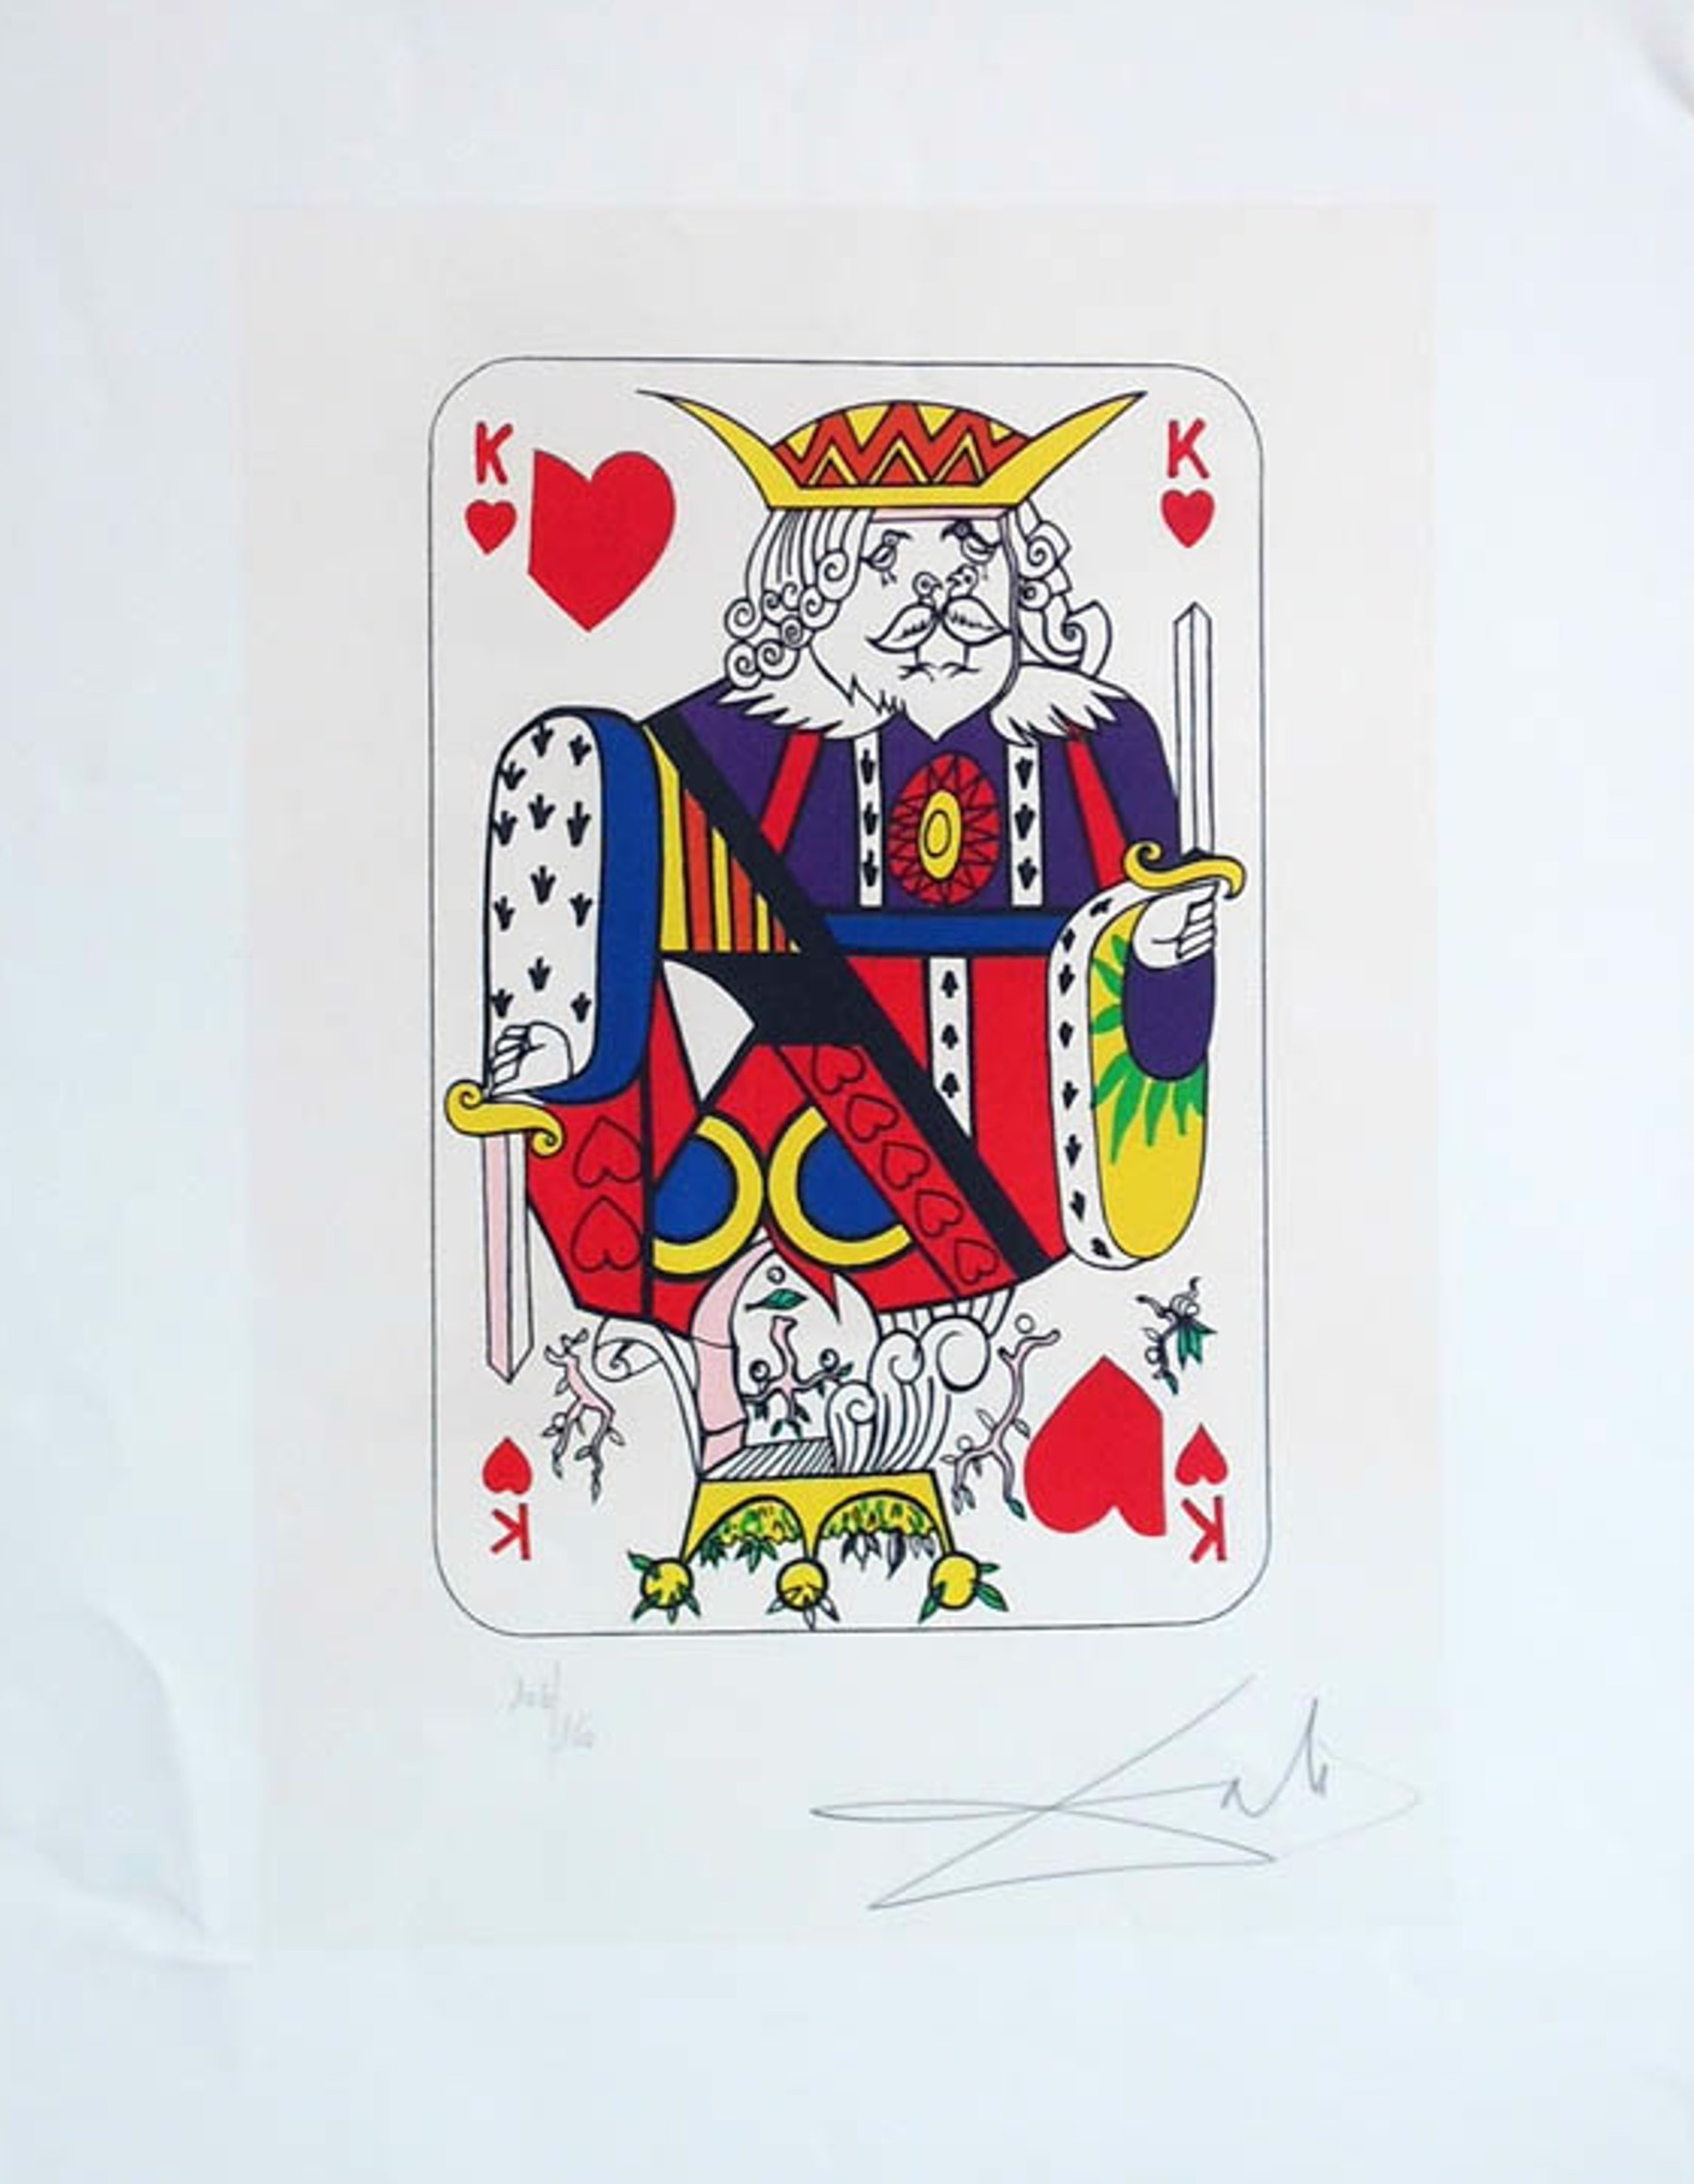 King of Hearts by Salvador Dali